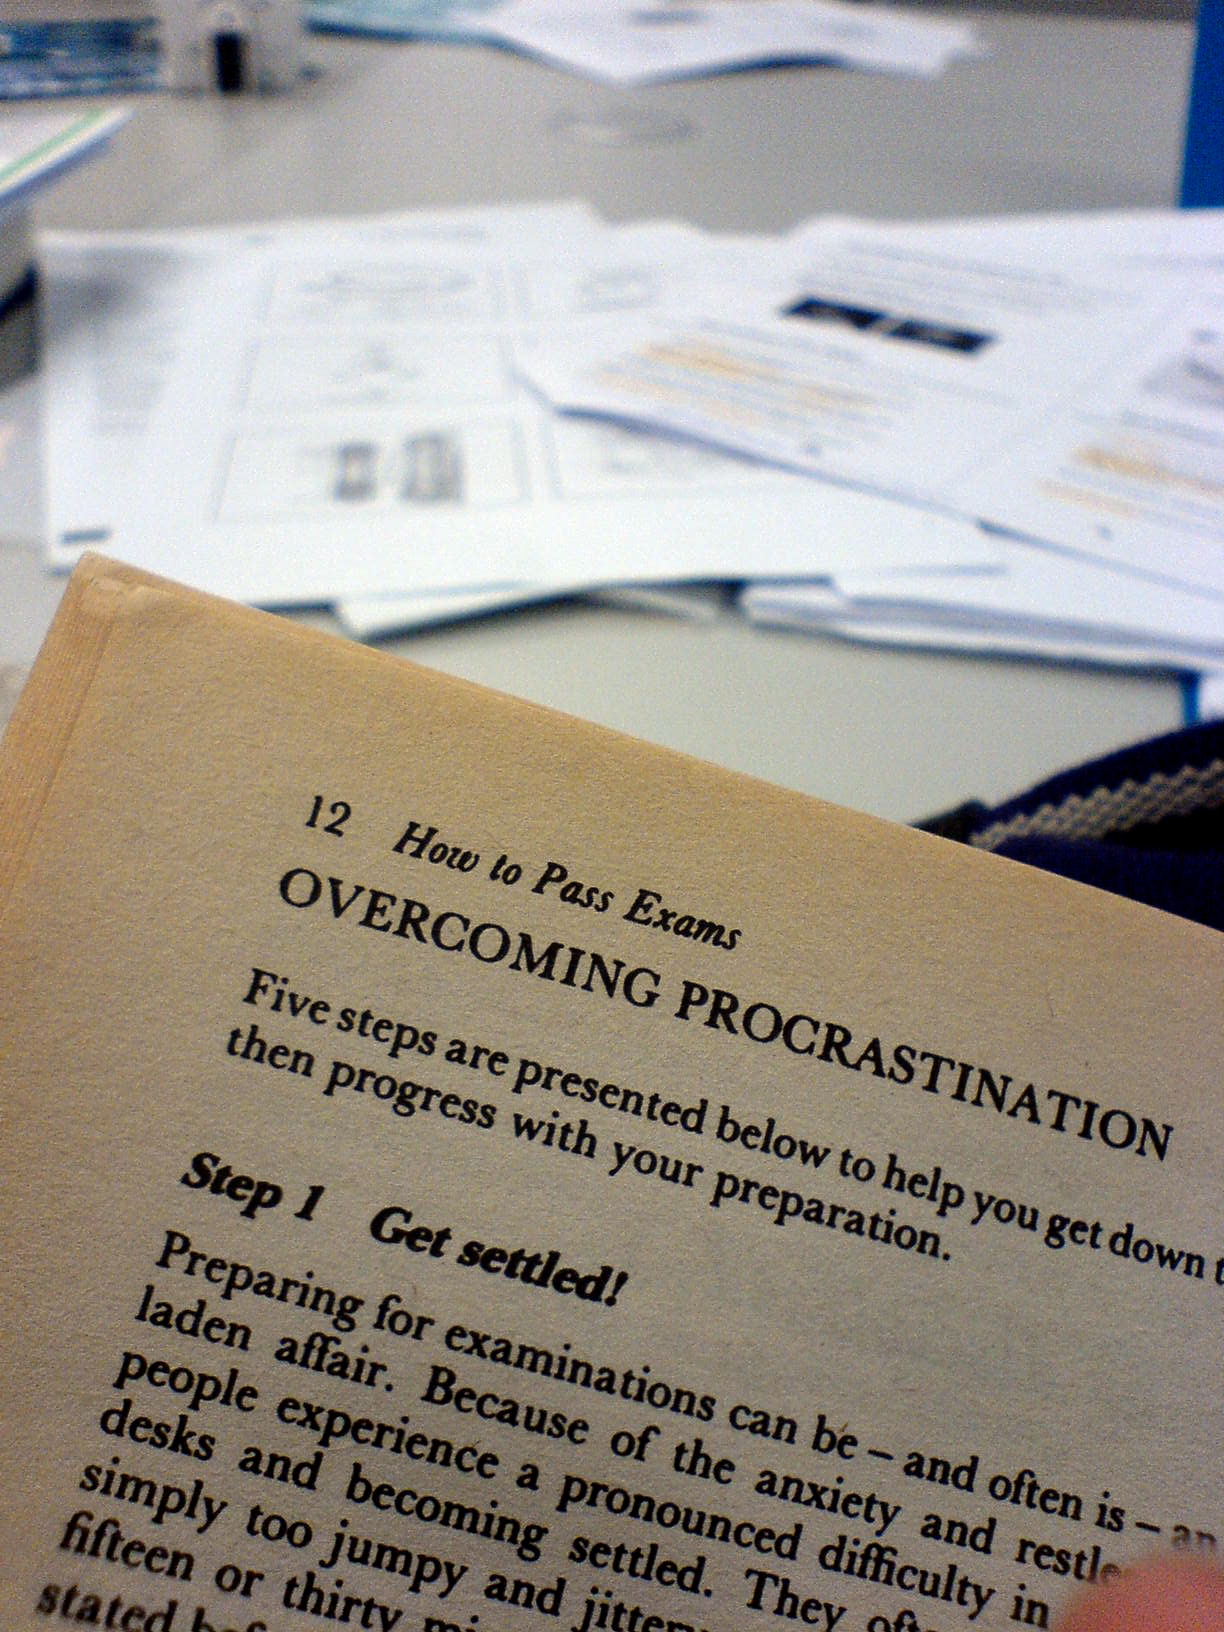 A book, it reads "How to pass exams", Overcoming Procrastination